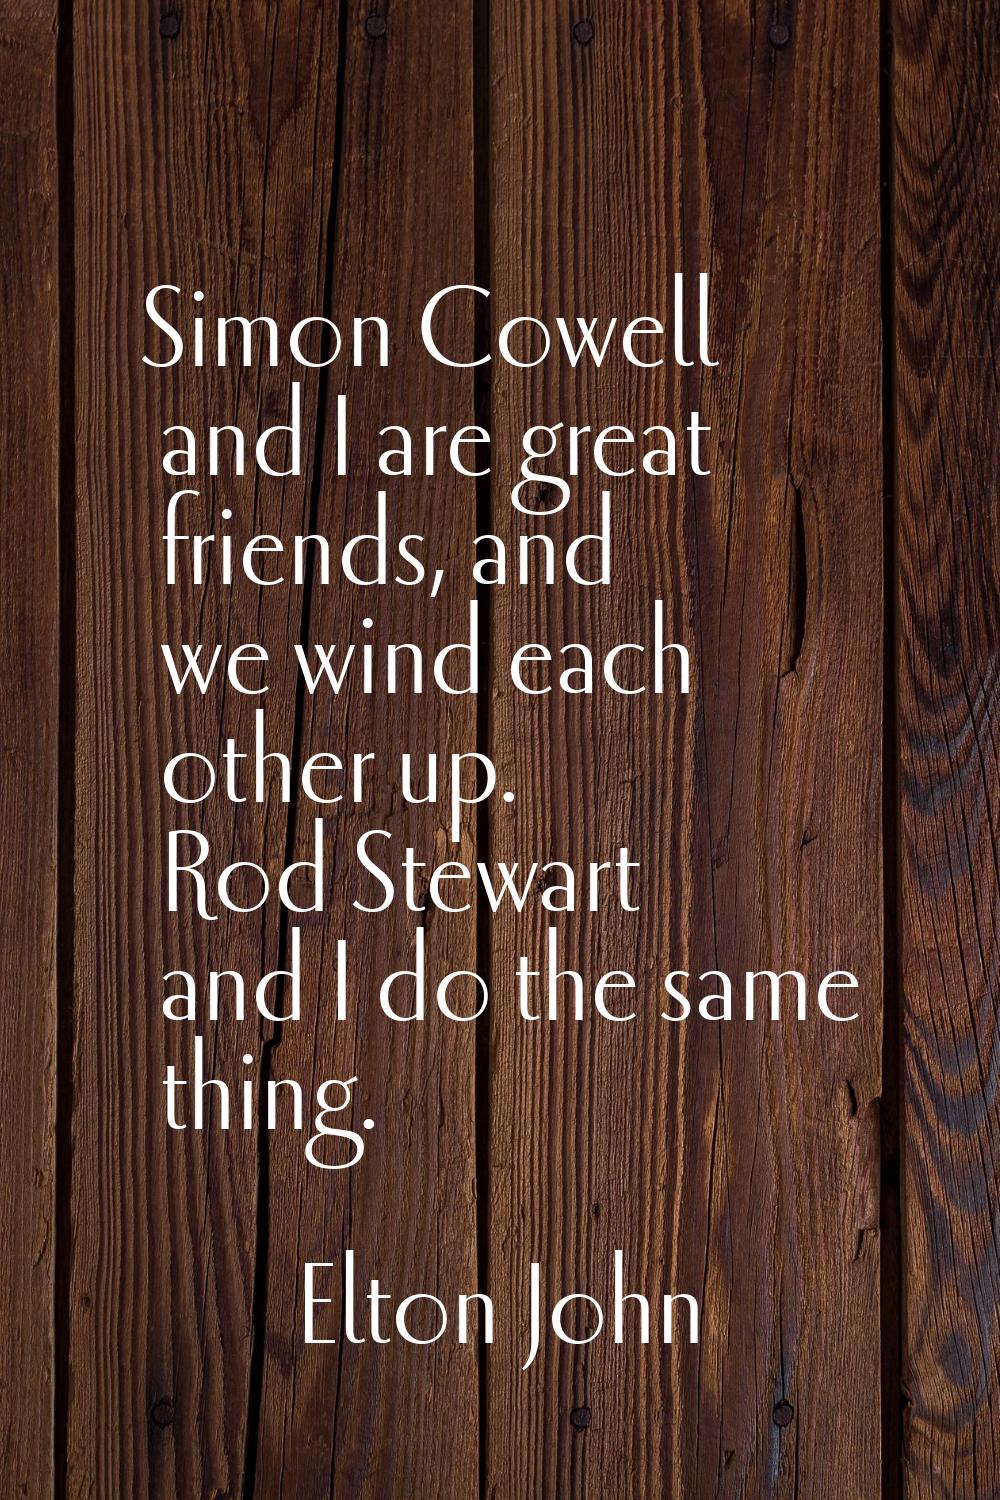 Simon Cowell and I are great friends, and we wind each other up. Rod Stewart and I do the same thin